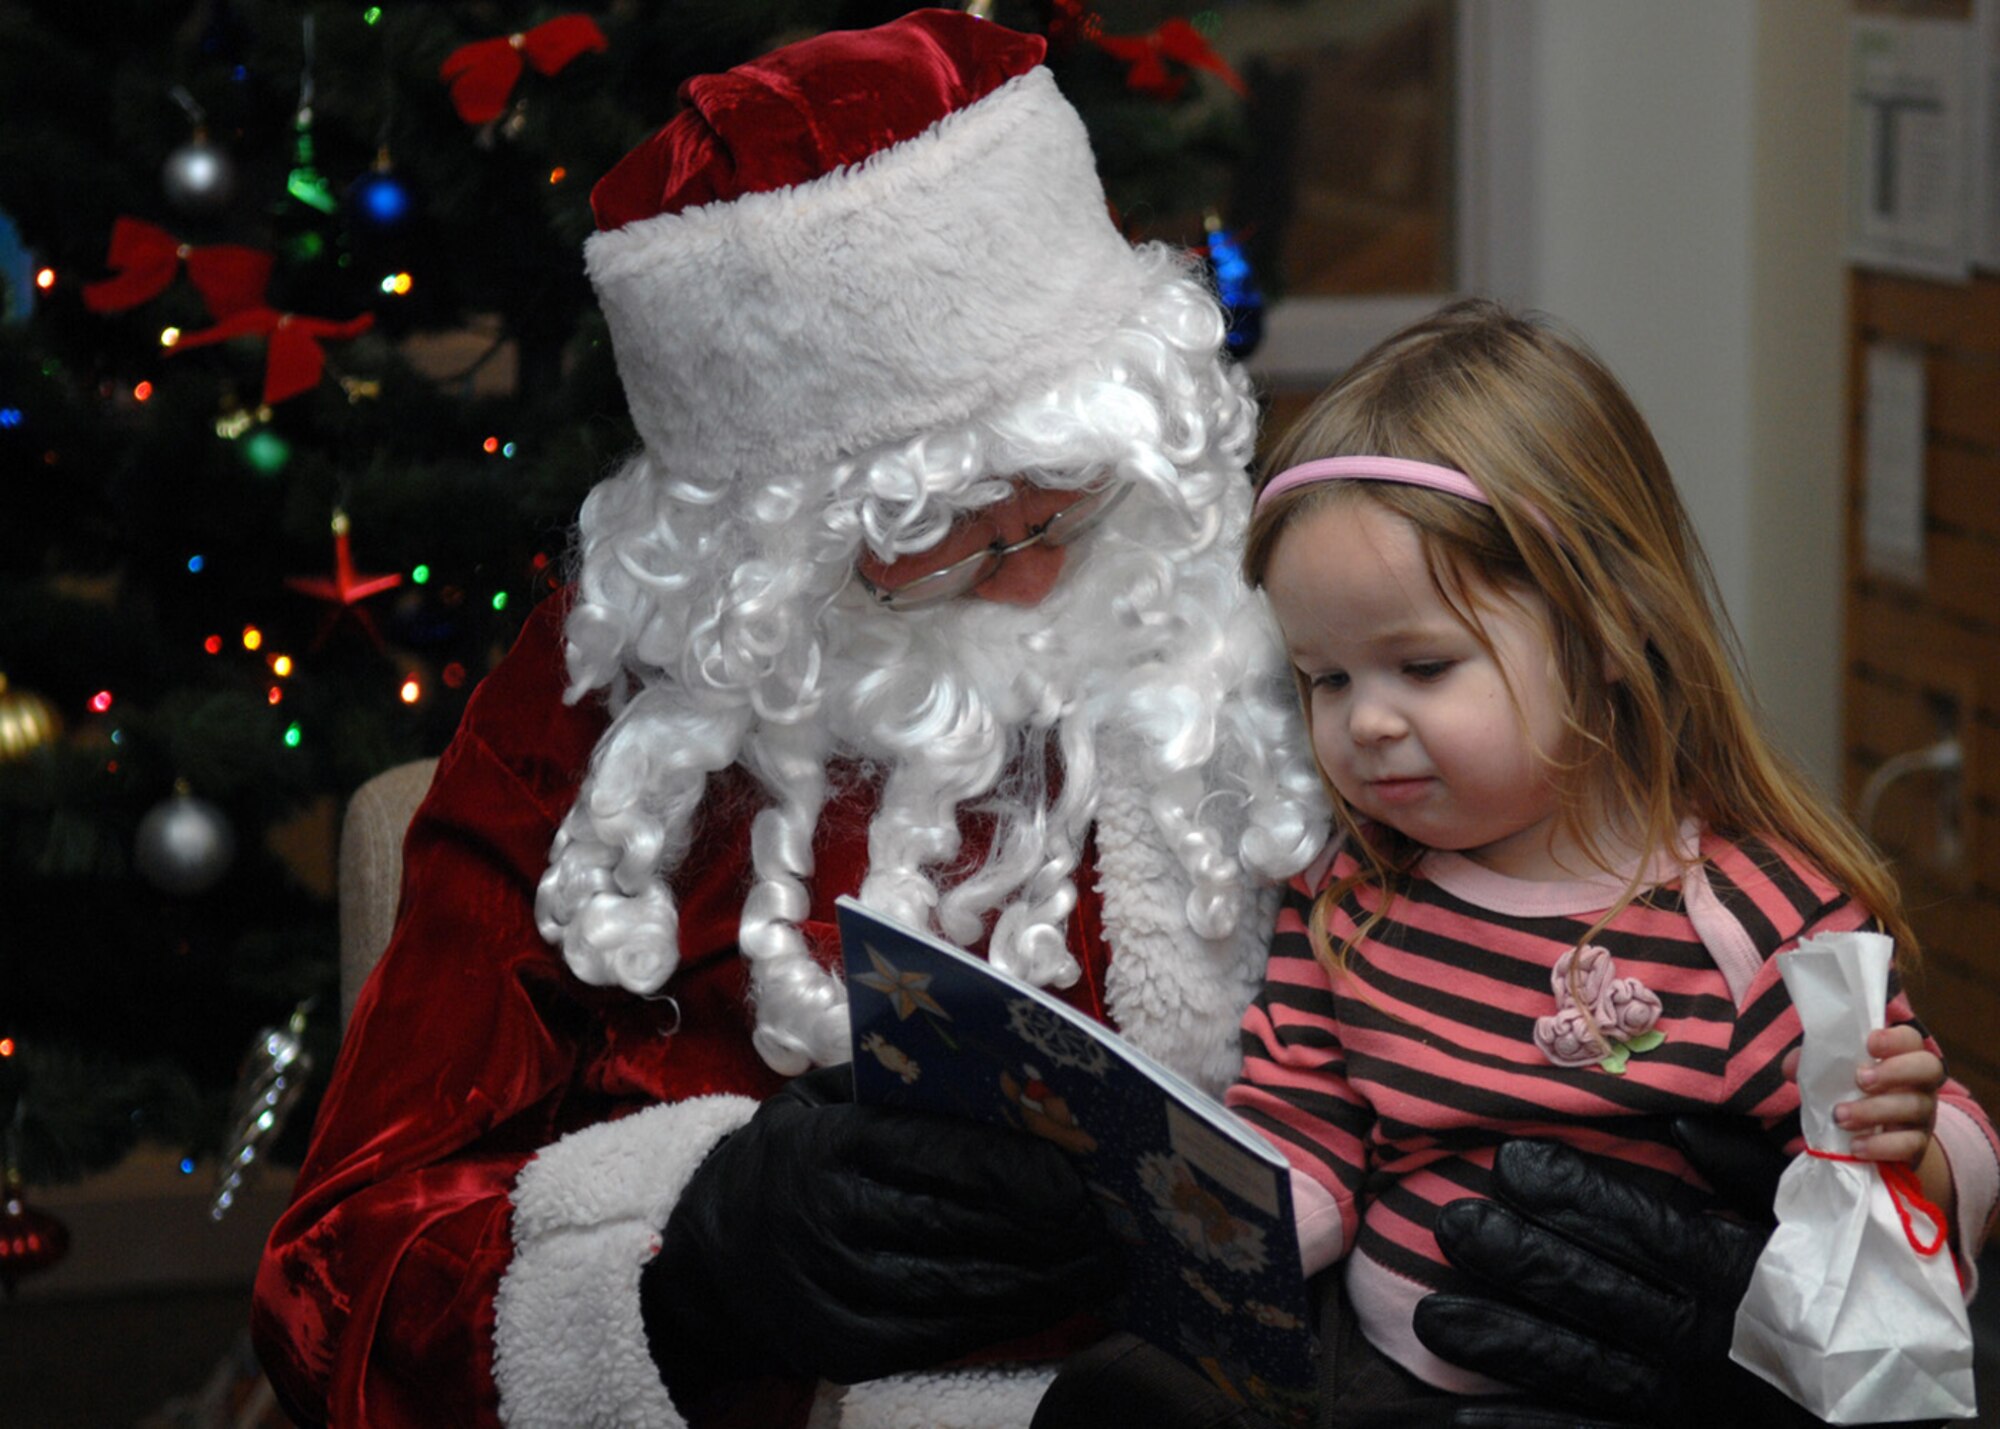 Kaytlyn Barrett sits on Santa's lap at Ahren's Memorial library at Holloman Air Force Base, N.M., Dec. 17. A bag of candy and a reading book were given to all children who attended story time with Santa. (U.S. Air Force photo/Airman 1st Class Veronica Salgado)